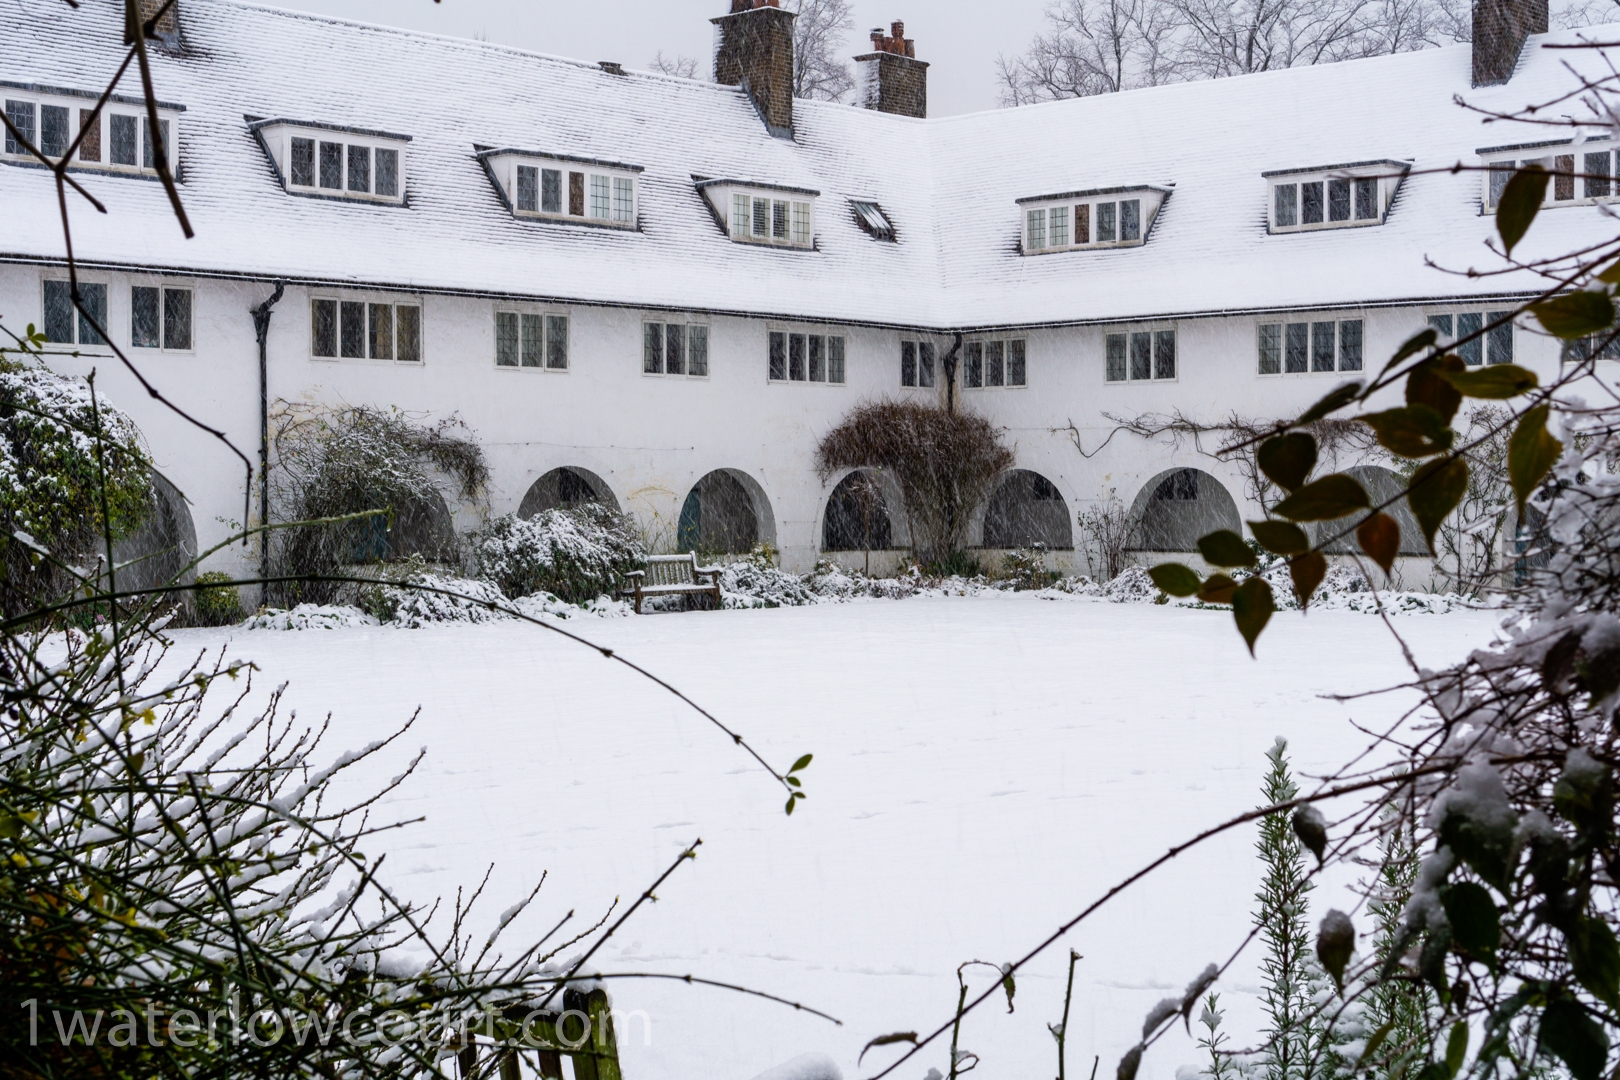 The central communal garden at Waterlow Court, covered in snow. Waterlow Court is an Arts & Crafts Grade II* listed building, designed by M. H. Baillie Scott, 1909, located in Hampstead Garden Suburb, London NW11 7DT. Flat 1, a one-bedroom, ground-floor flat, is for sale. Listed on Rightmove and Zoopla.